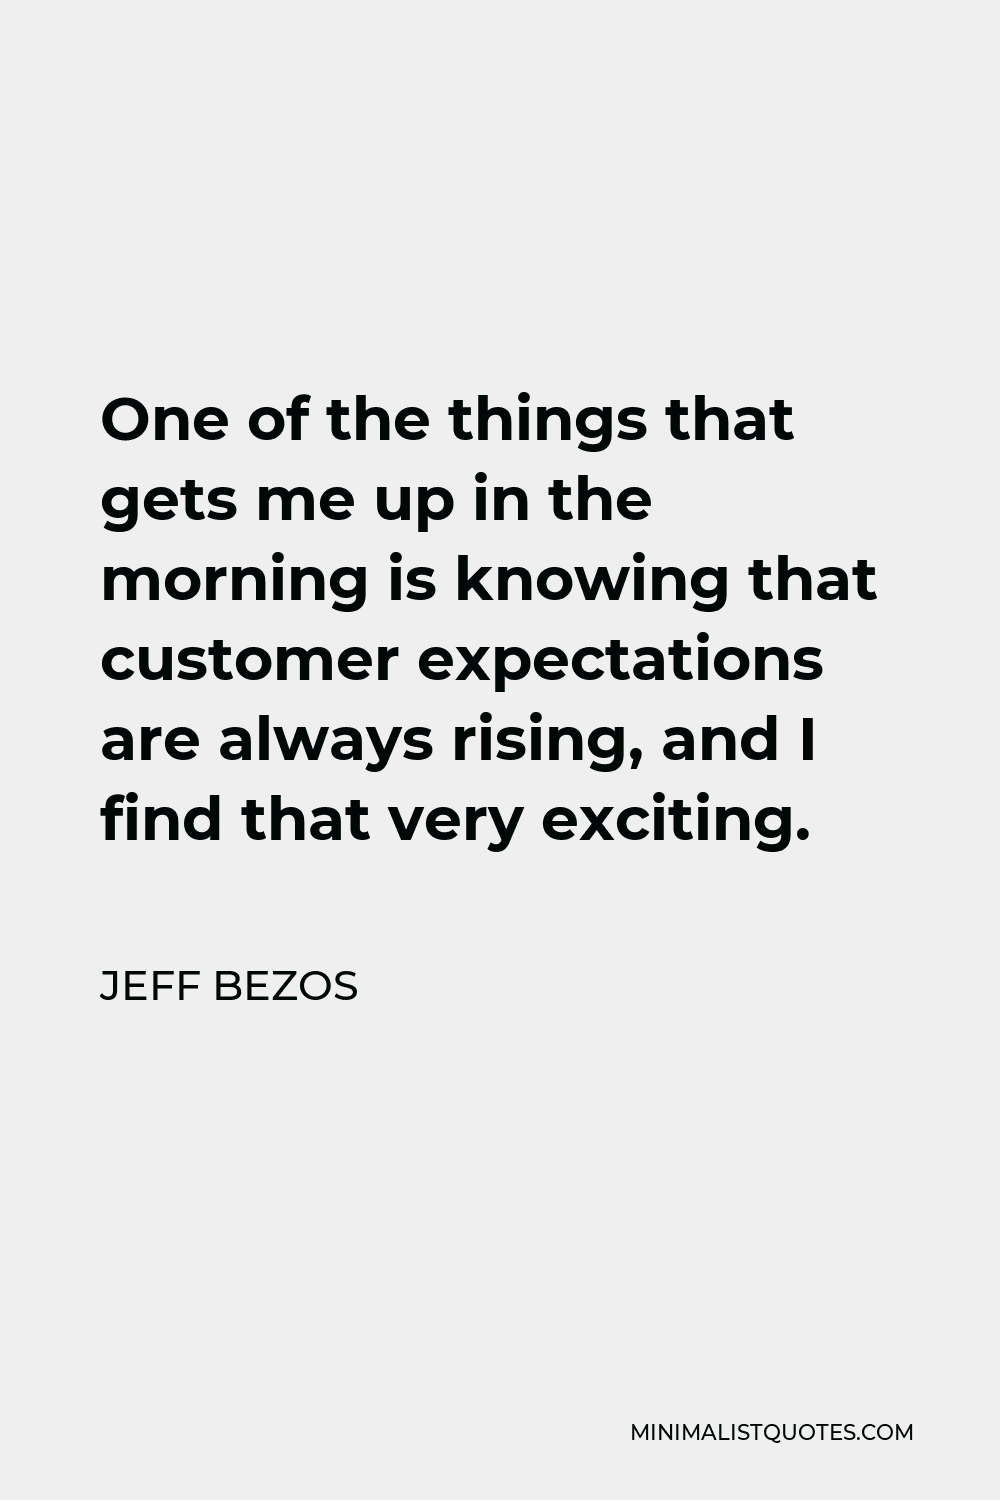 Jeff Bezos Quote - One of the things that gets me up in the morning is knowing that customer expectations are always rising, and I find that very exciting.